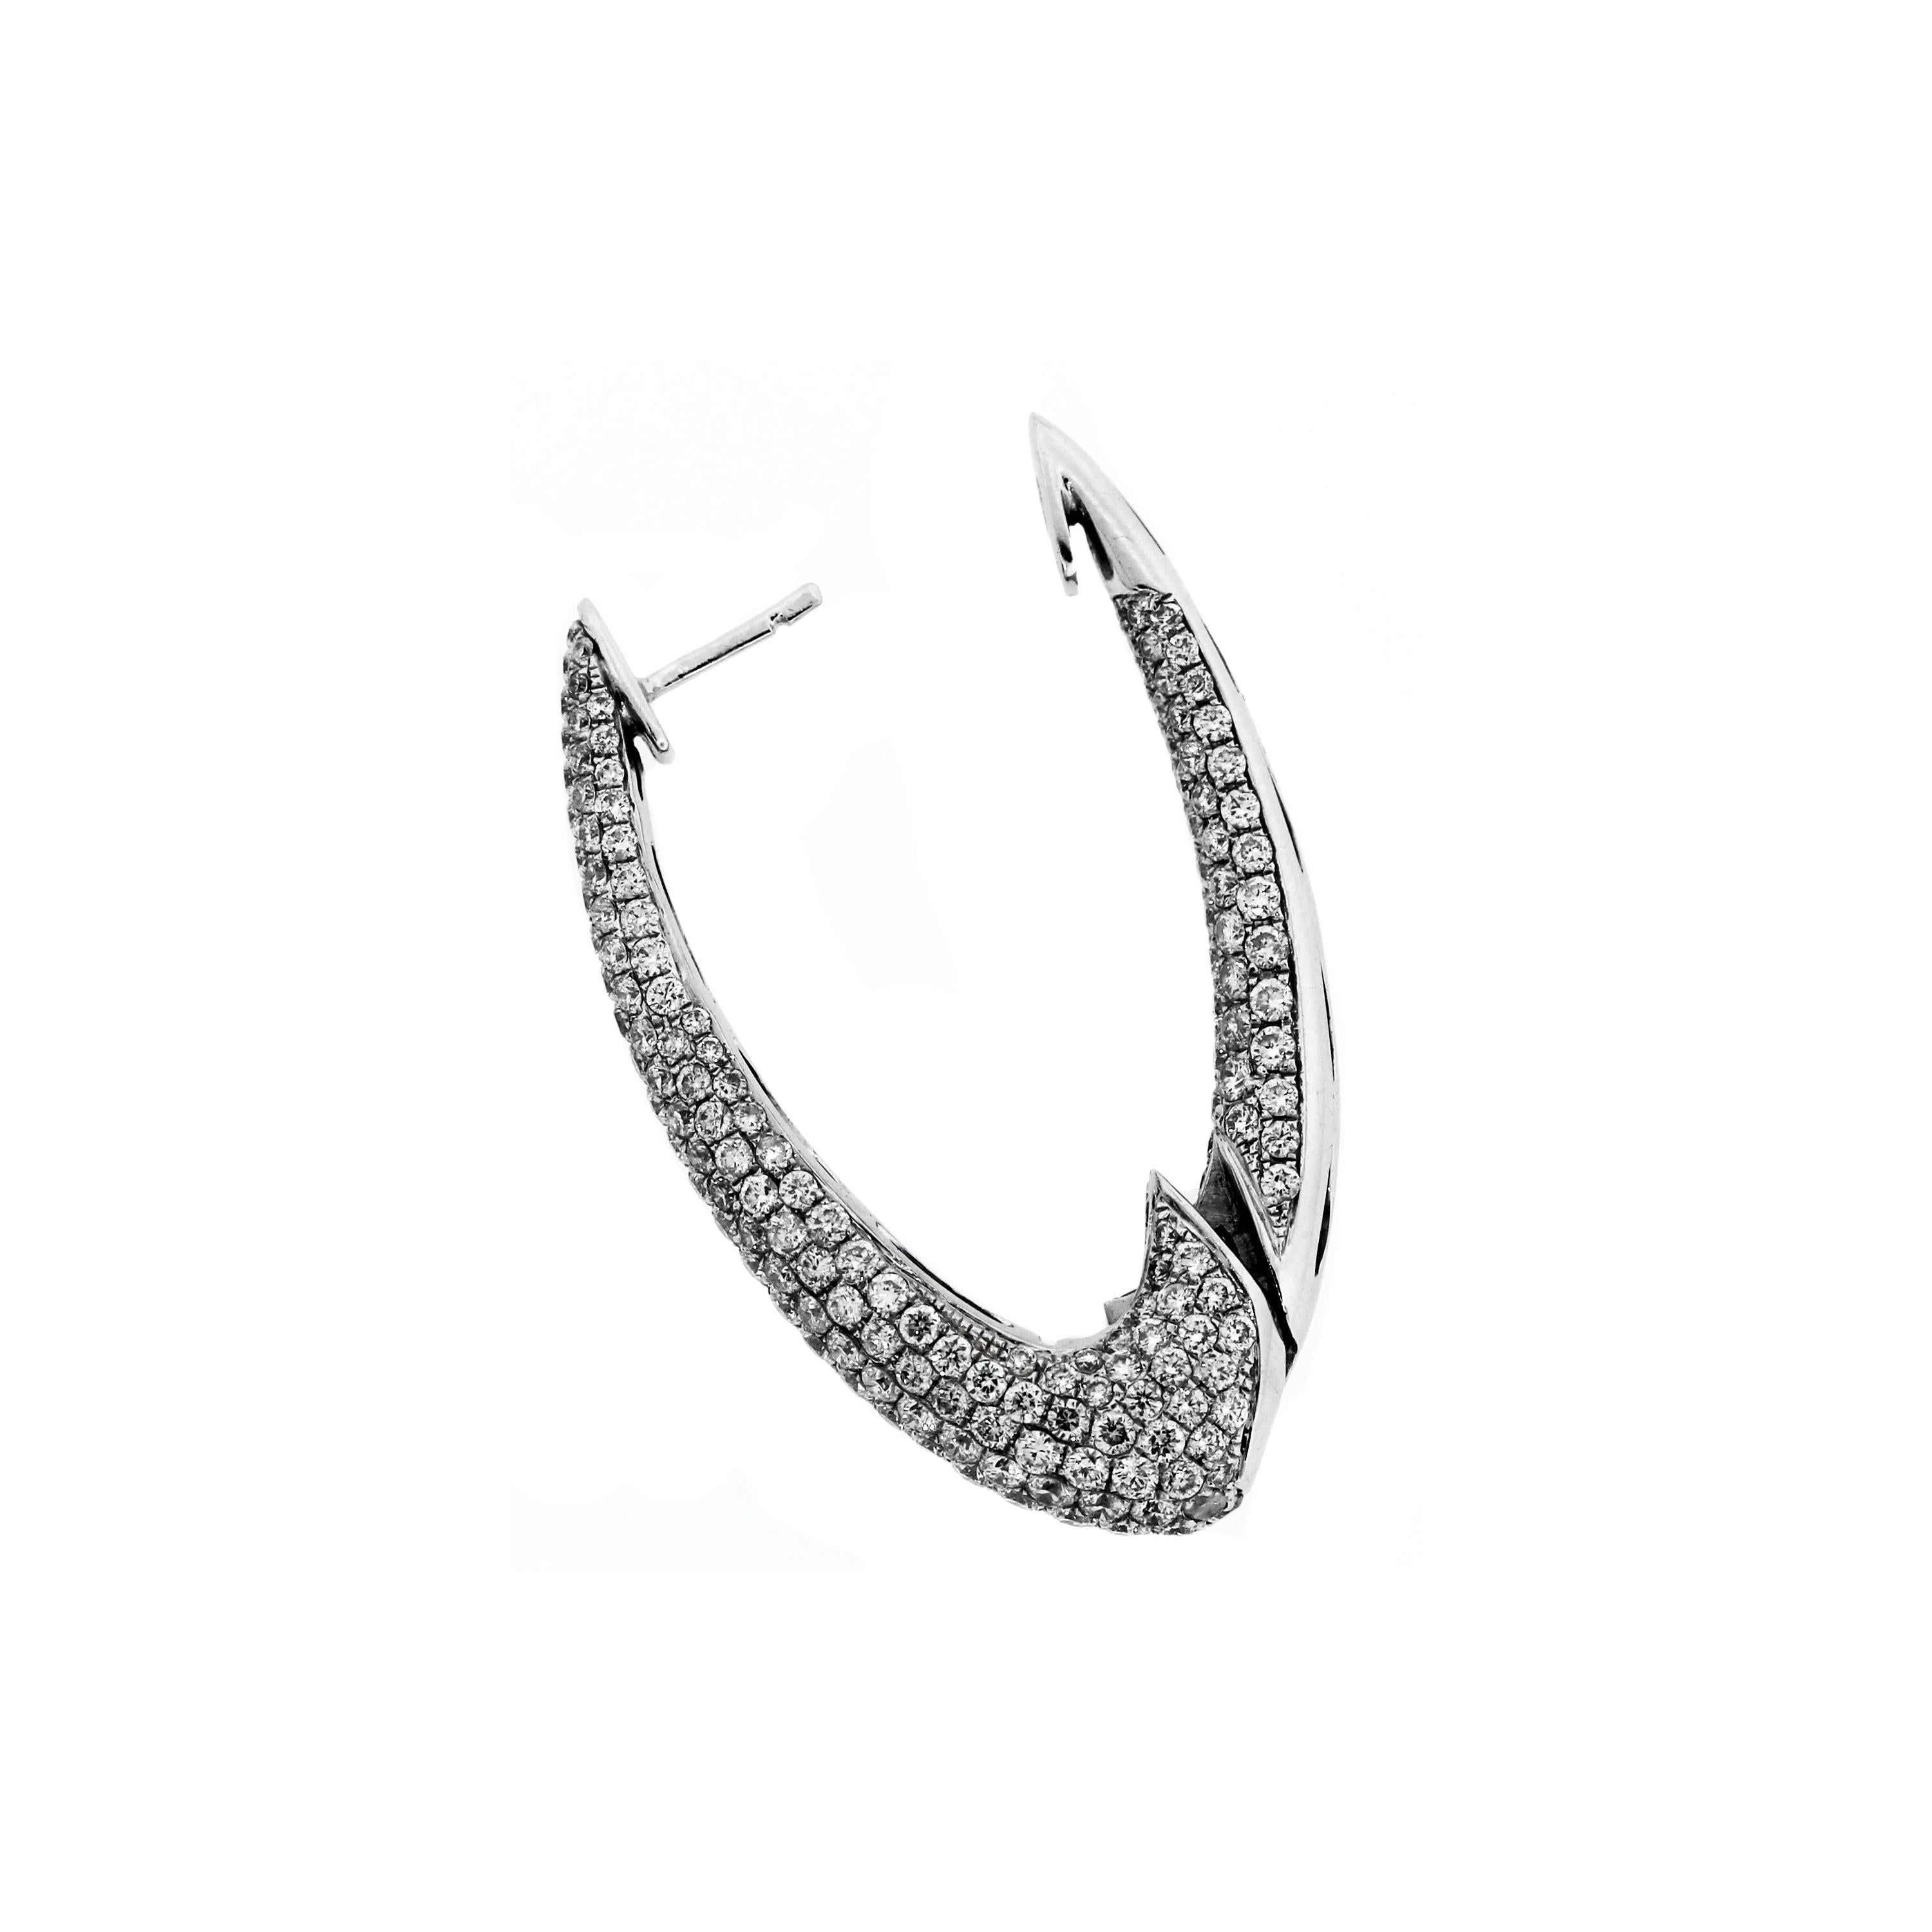 18K White Gold and Diamond Inside-Out Oval Shape Hoop Earrings

Apprx. 8 carat G Color, VS Clarity Diamonds cover these entire pair of earrings.

Earrings are 1.6 inches in length and have diamonds set on the edges as well.